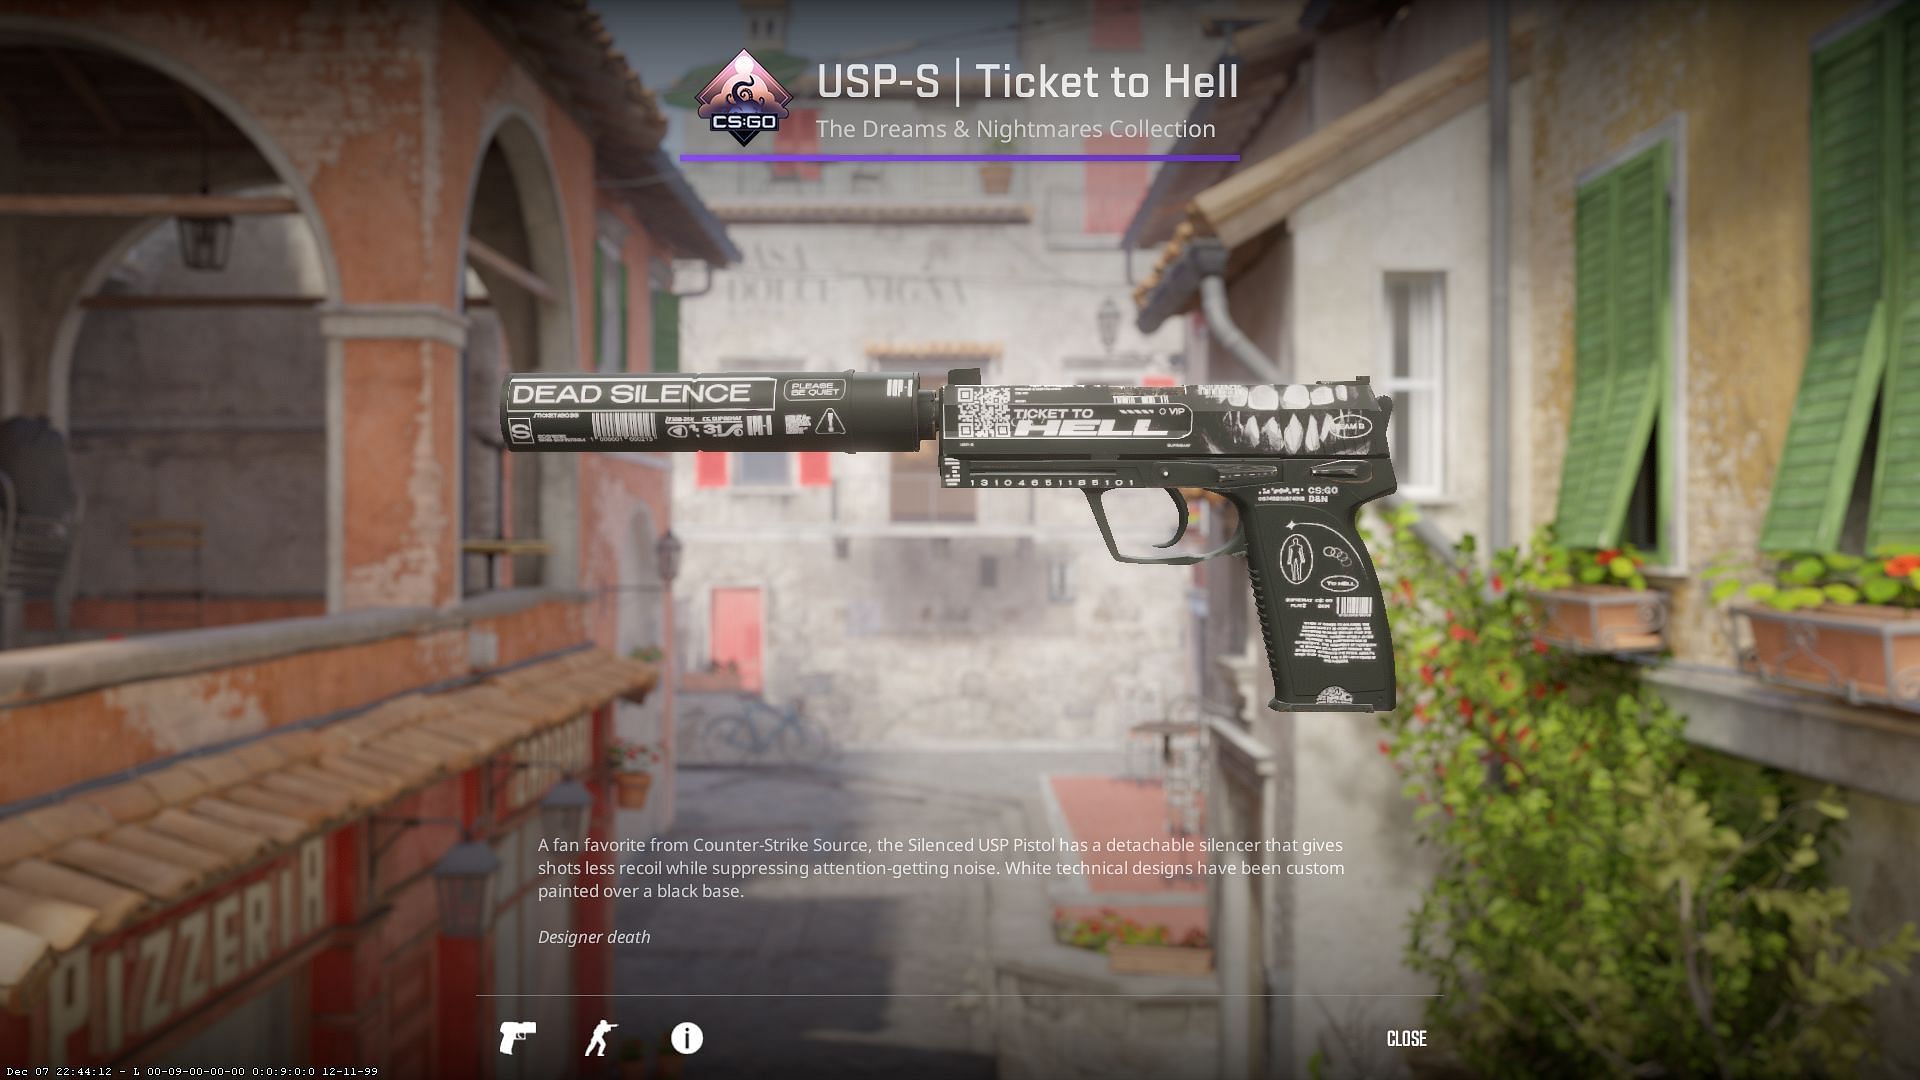 The USP-S Ticket to Hell (Image via Valve)